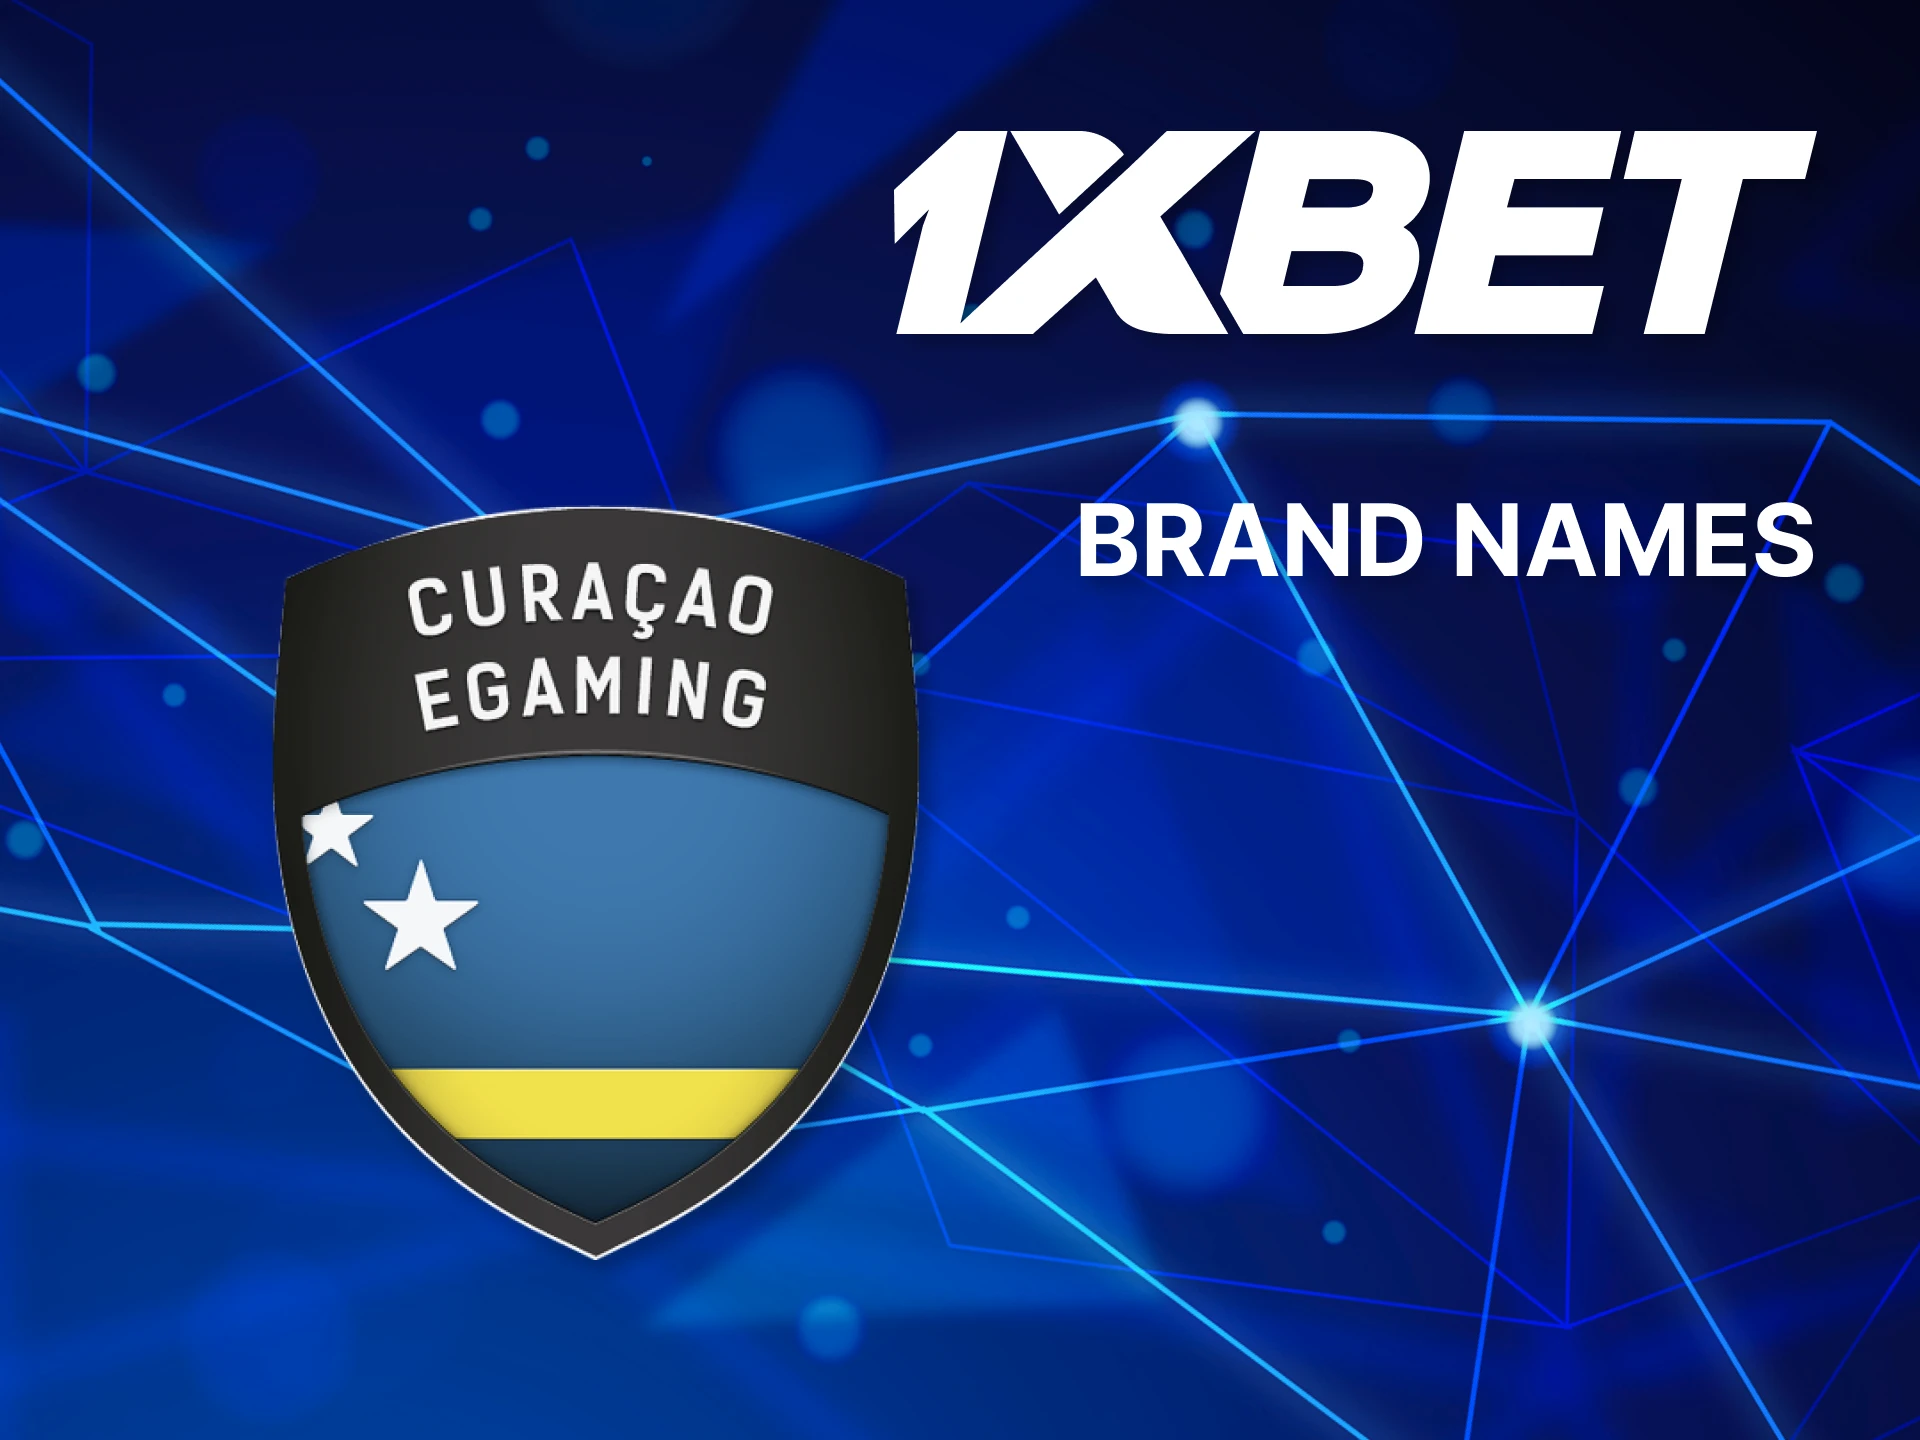 All brands on 1xBet are mentioned and used under a Curacao license.